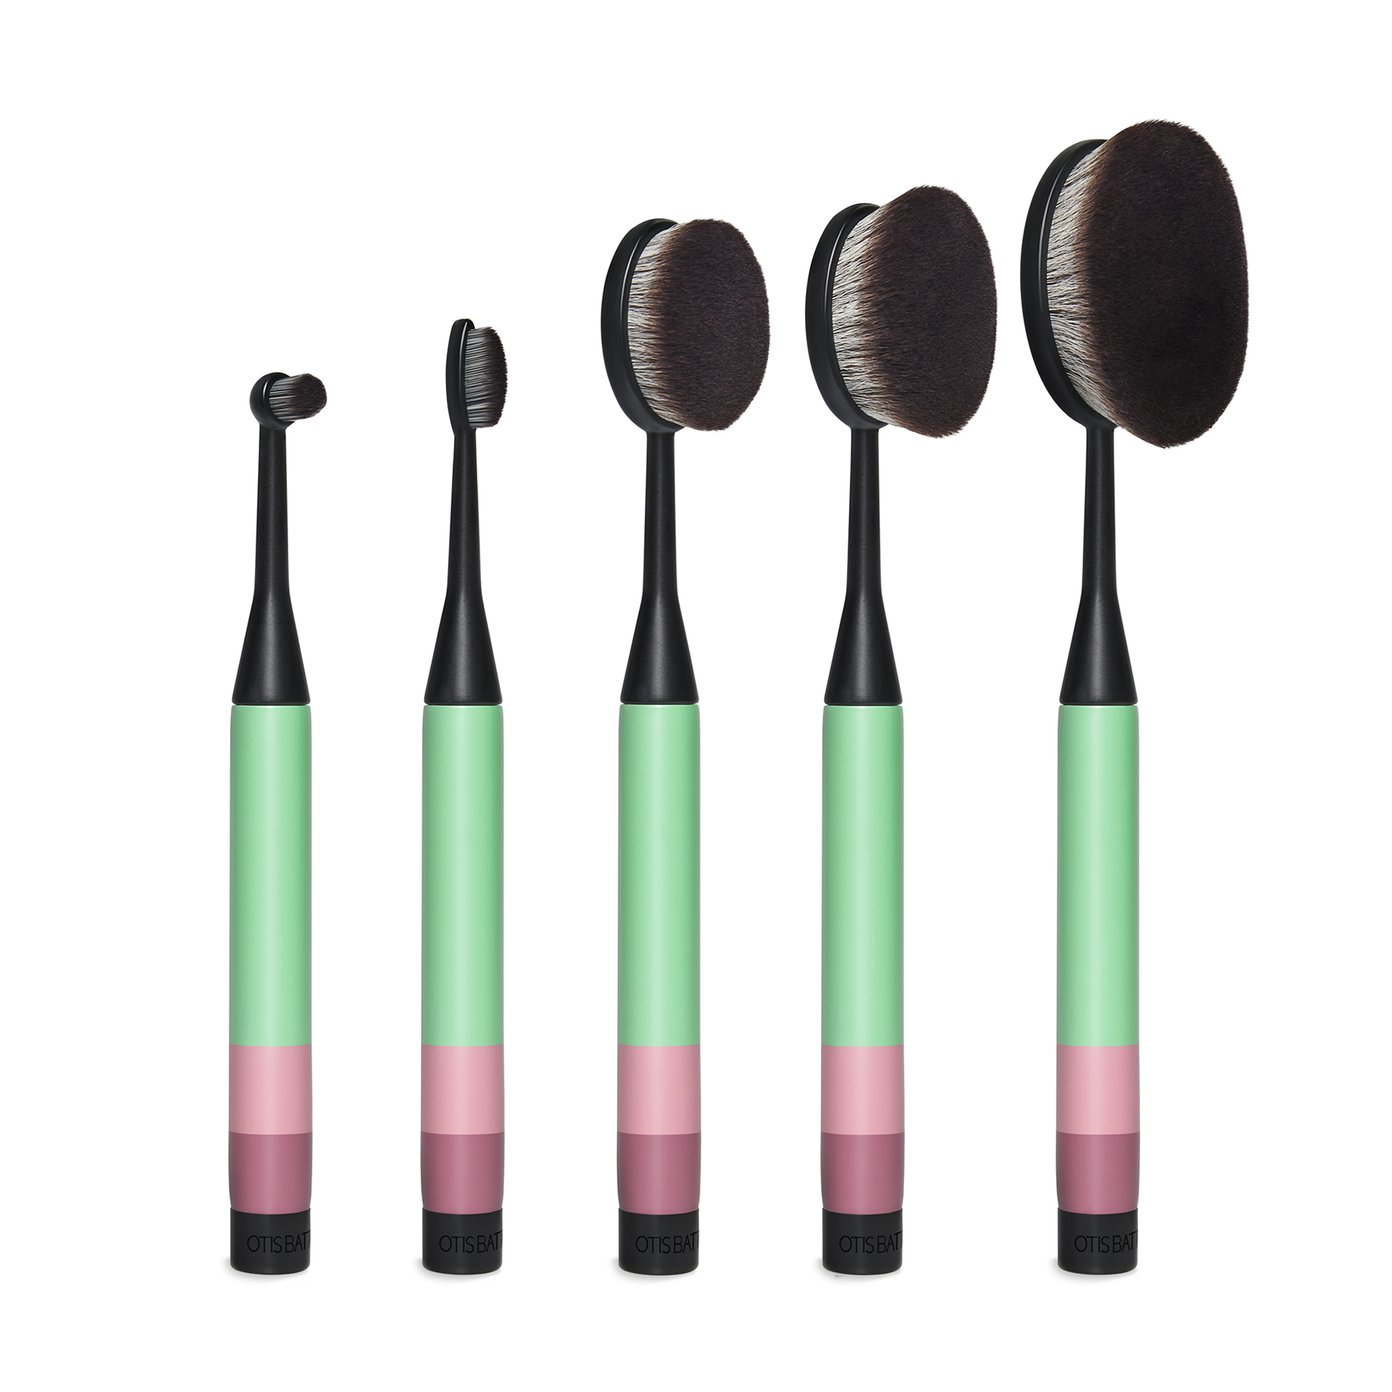 The Complete Brush Set - Makeup Brushes & Tools